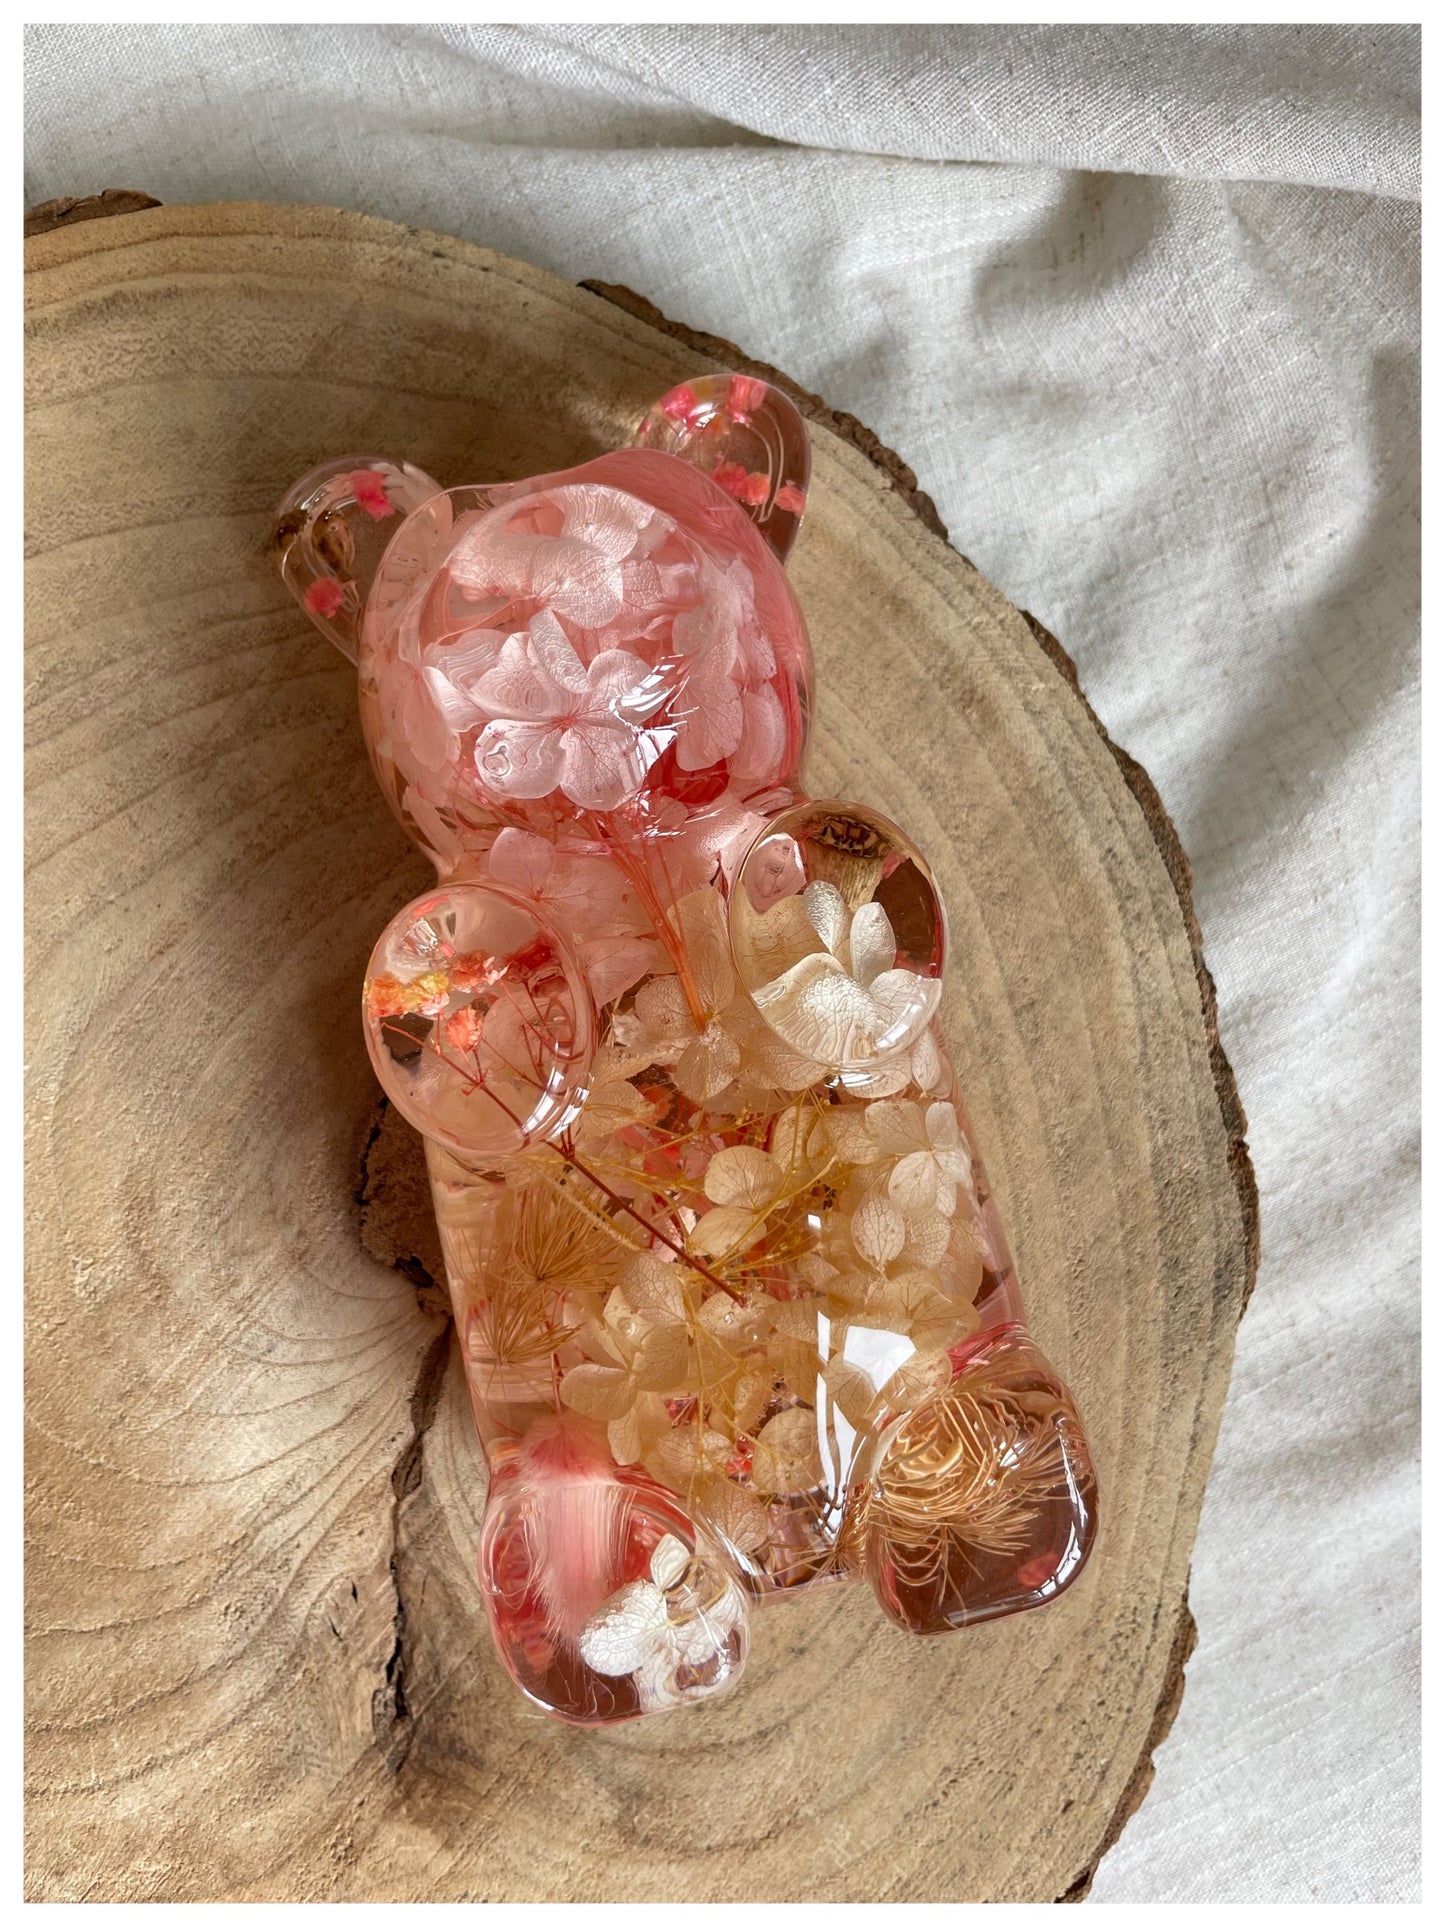 Large Teddy Bear - Pink Dried Flowers